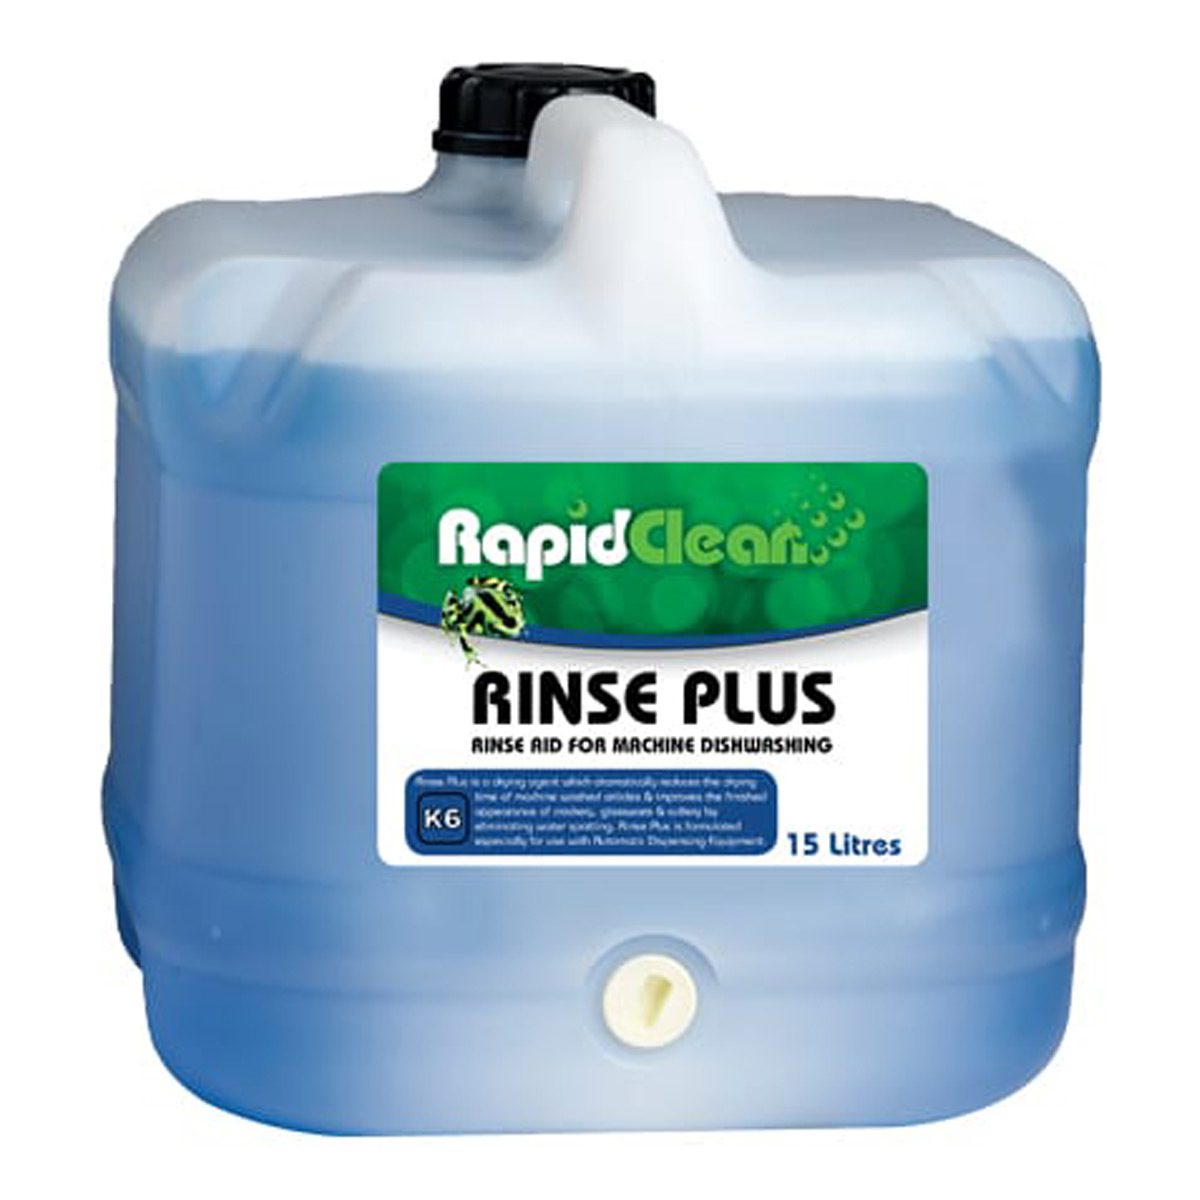 cleaning-products-kitchen-multipurpose-kemsol-rinse-plus-15L-litre-machine-dishwashing-drying agent-reduces-drying-time-machine-washed-articles-formulated-automatic-dispensing-vjs-distributors-RAP140125